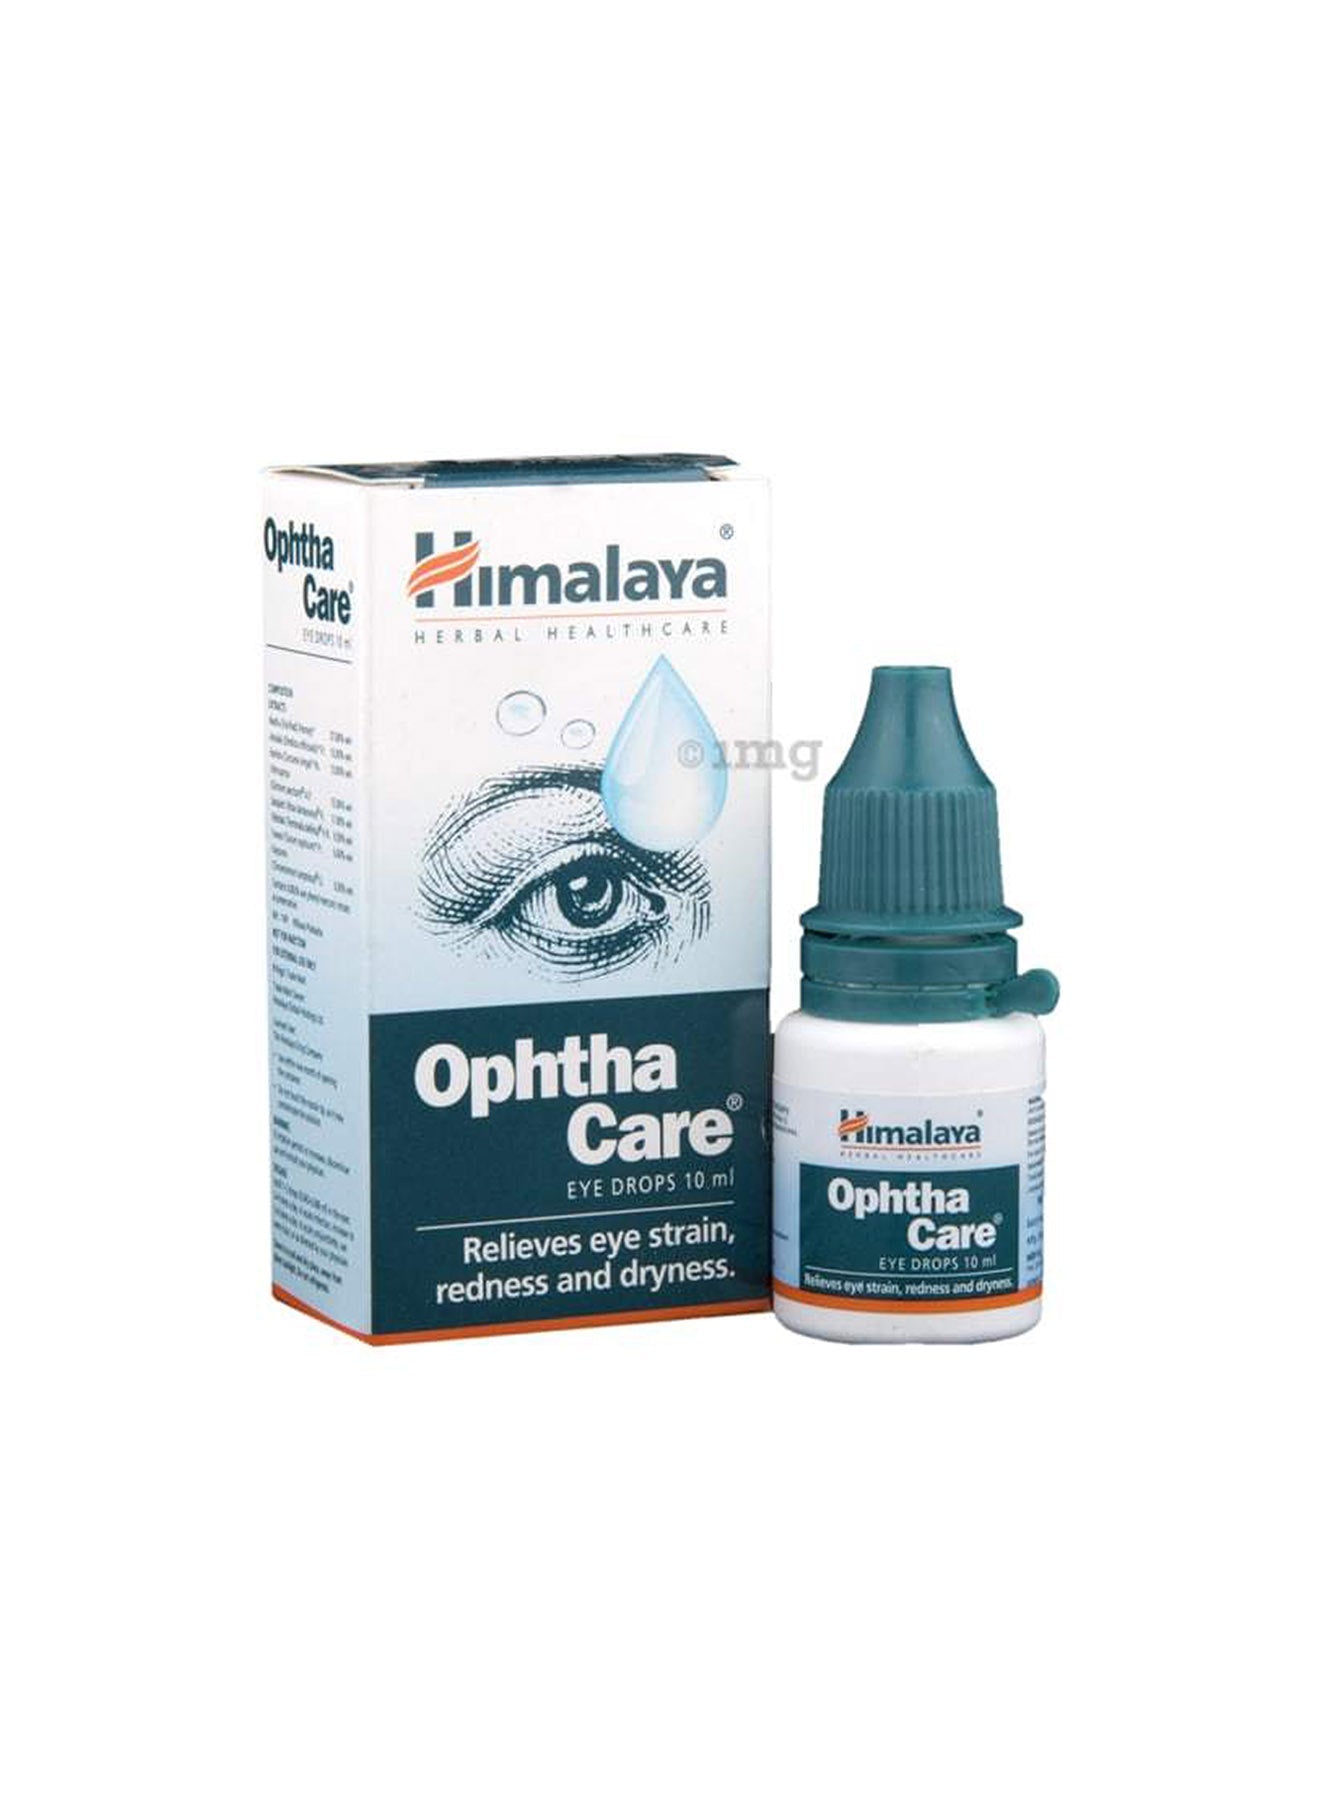 Himalaya Ophthacare Eye Drops 10ml Value Pack of 12 